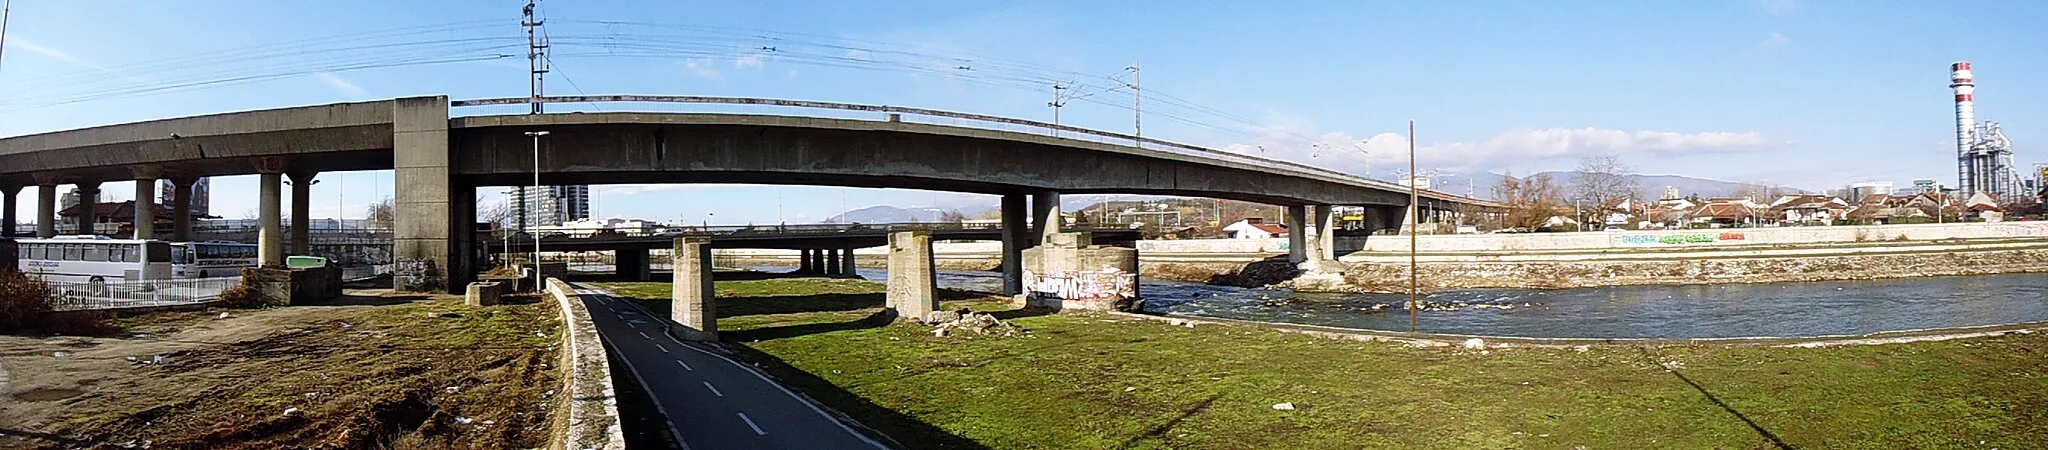 Photo showing: The rail over pass of the Main train station Skopje (the closer brigde) and Belasica Bridge (the further bridge) crossing the Vardar Рiver. The right side of the image depicts the neighbourhood of Kjeramidnica, Municipality of Gazi Baba. Photographed from the neighobourhood of Ostrovo, Municipality of Aerodrom.